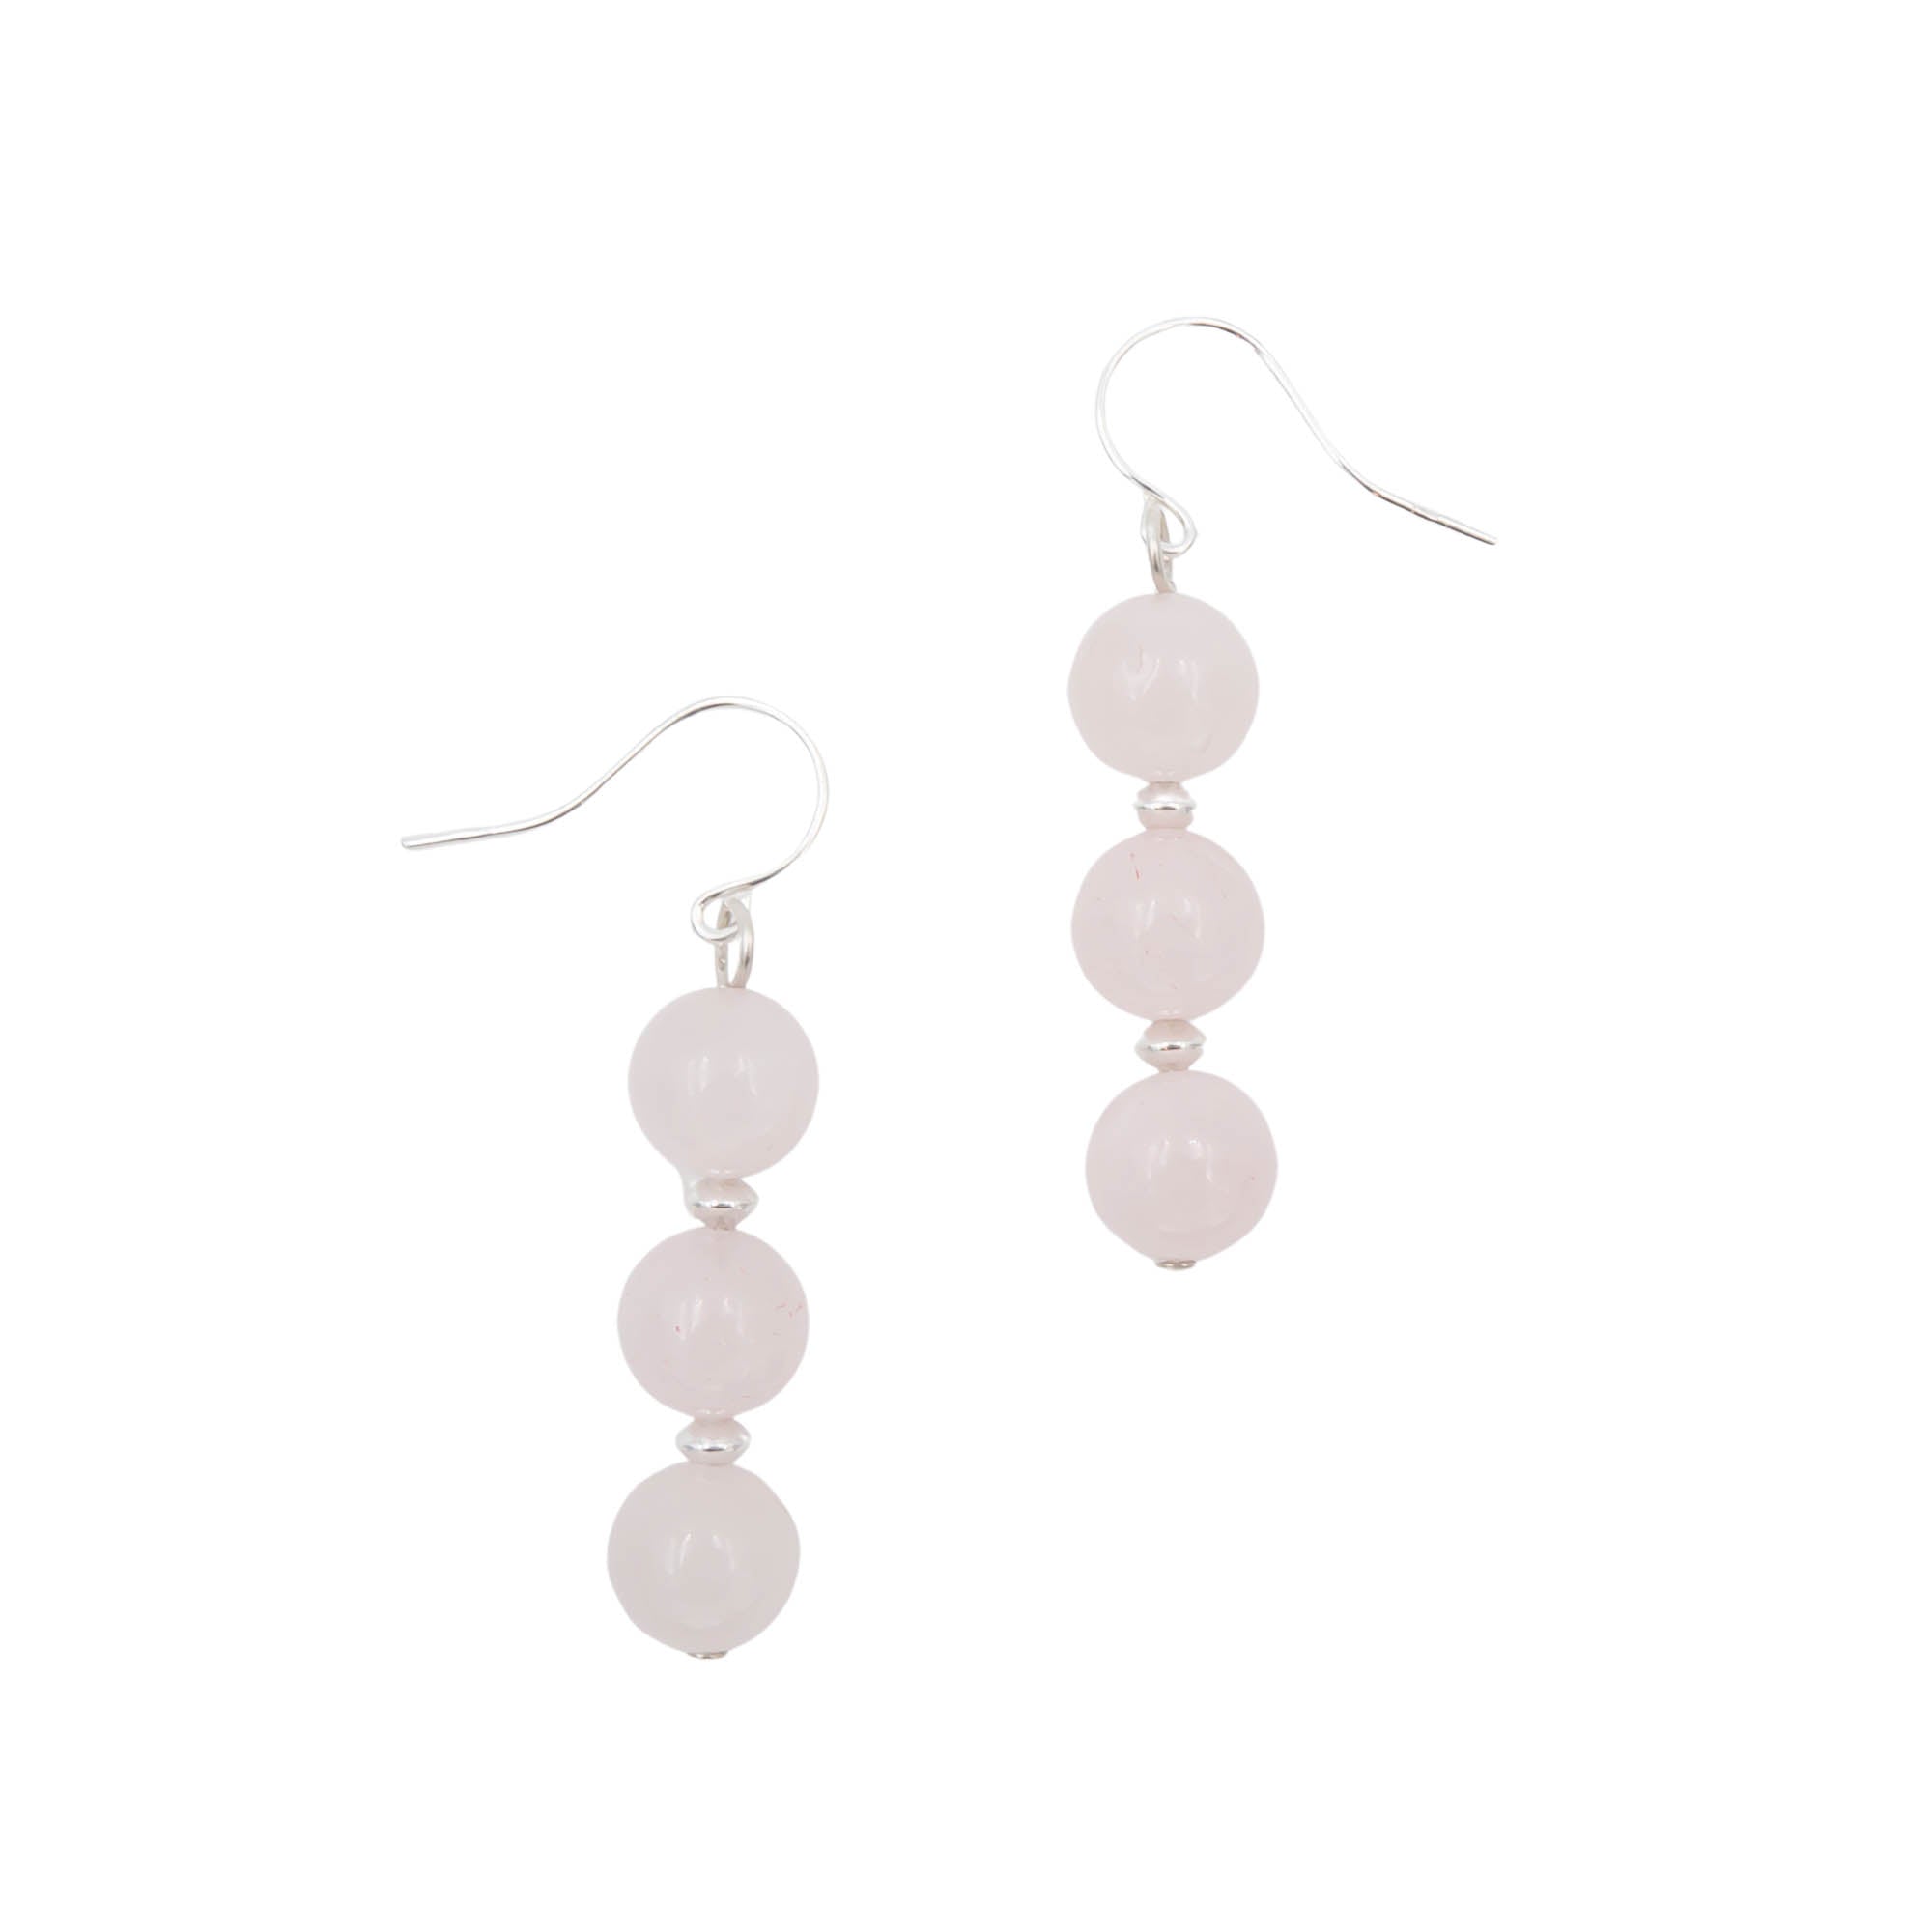 Earth Song Jewelry Handmade Stacked Rose Quartz Sterling Silver Earrings